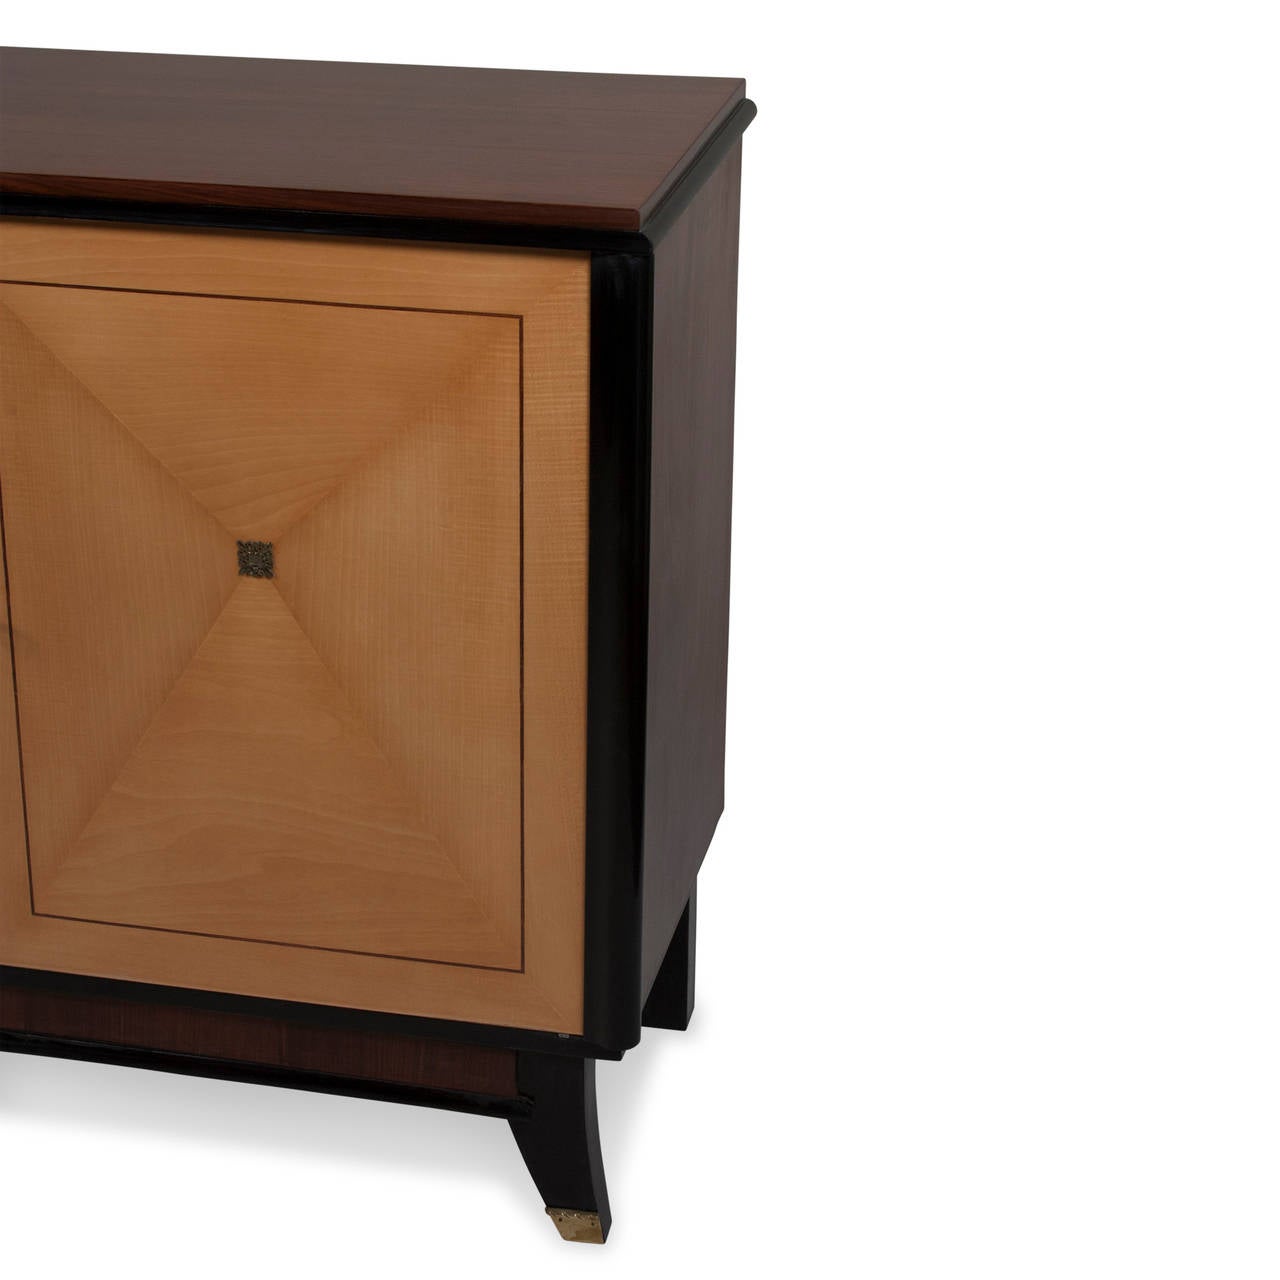 Rosewood, walnut and sycamore two door cabinet, the sycamore door faces having matched veneer star pattern centered on brass emblem. With ebonized accents and brass keyholes, the top surface and sides beautifully grained rosewood and walnut, the